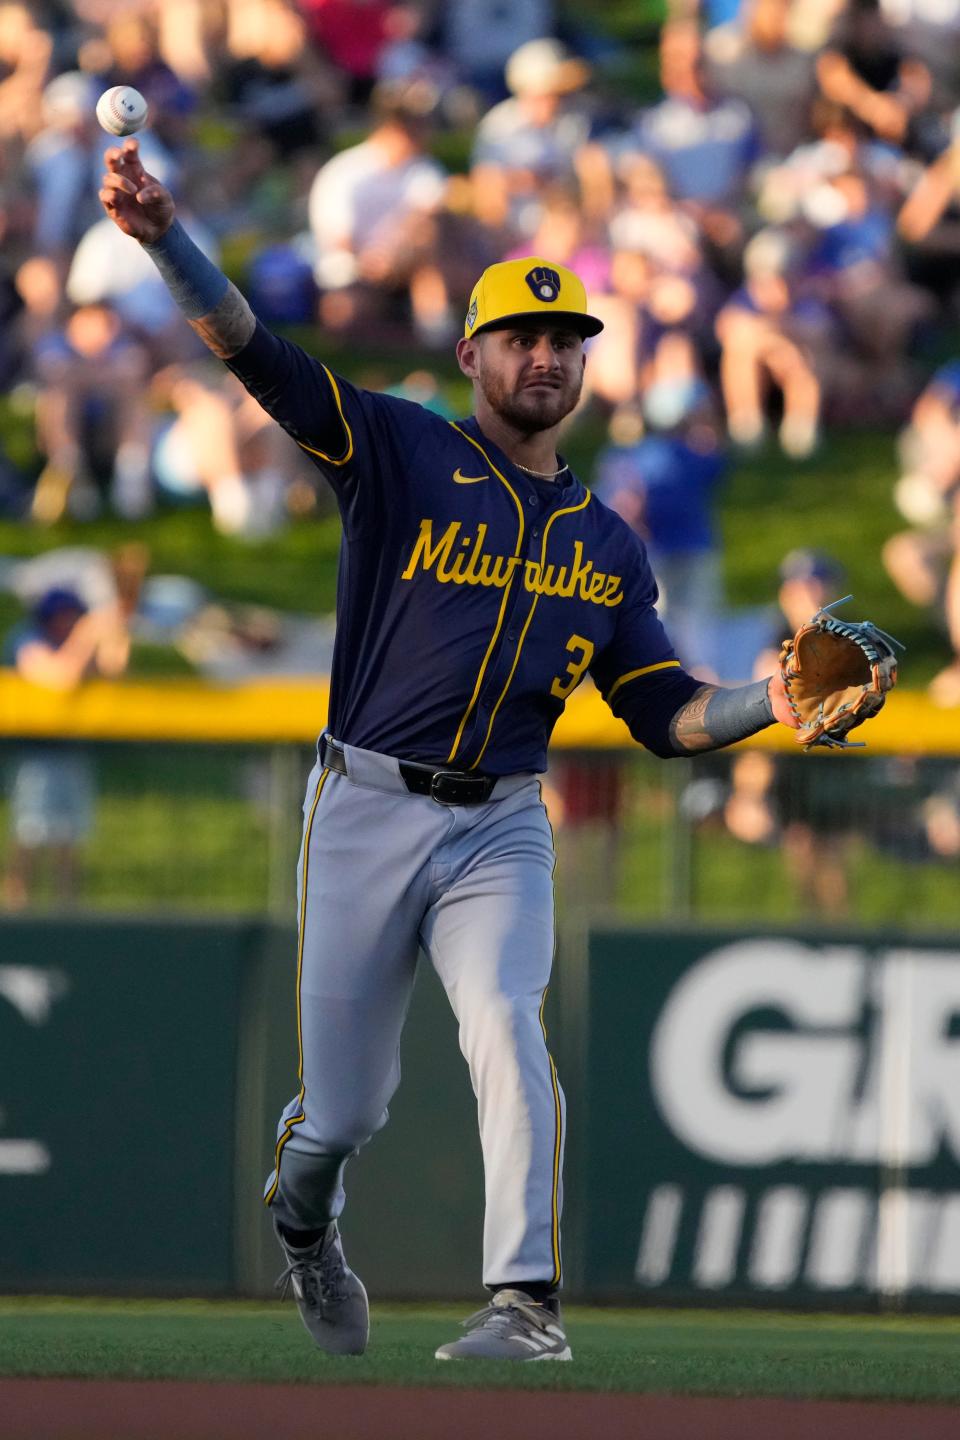 Joey Ortiz, who was acquired in the Corbin Burnes trade, can play second, third or shortstop.